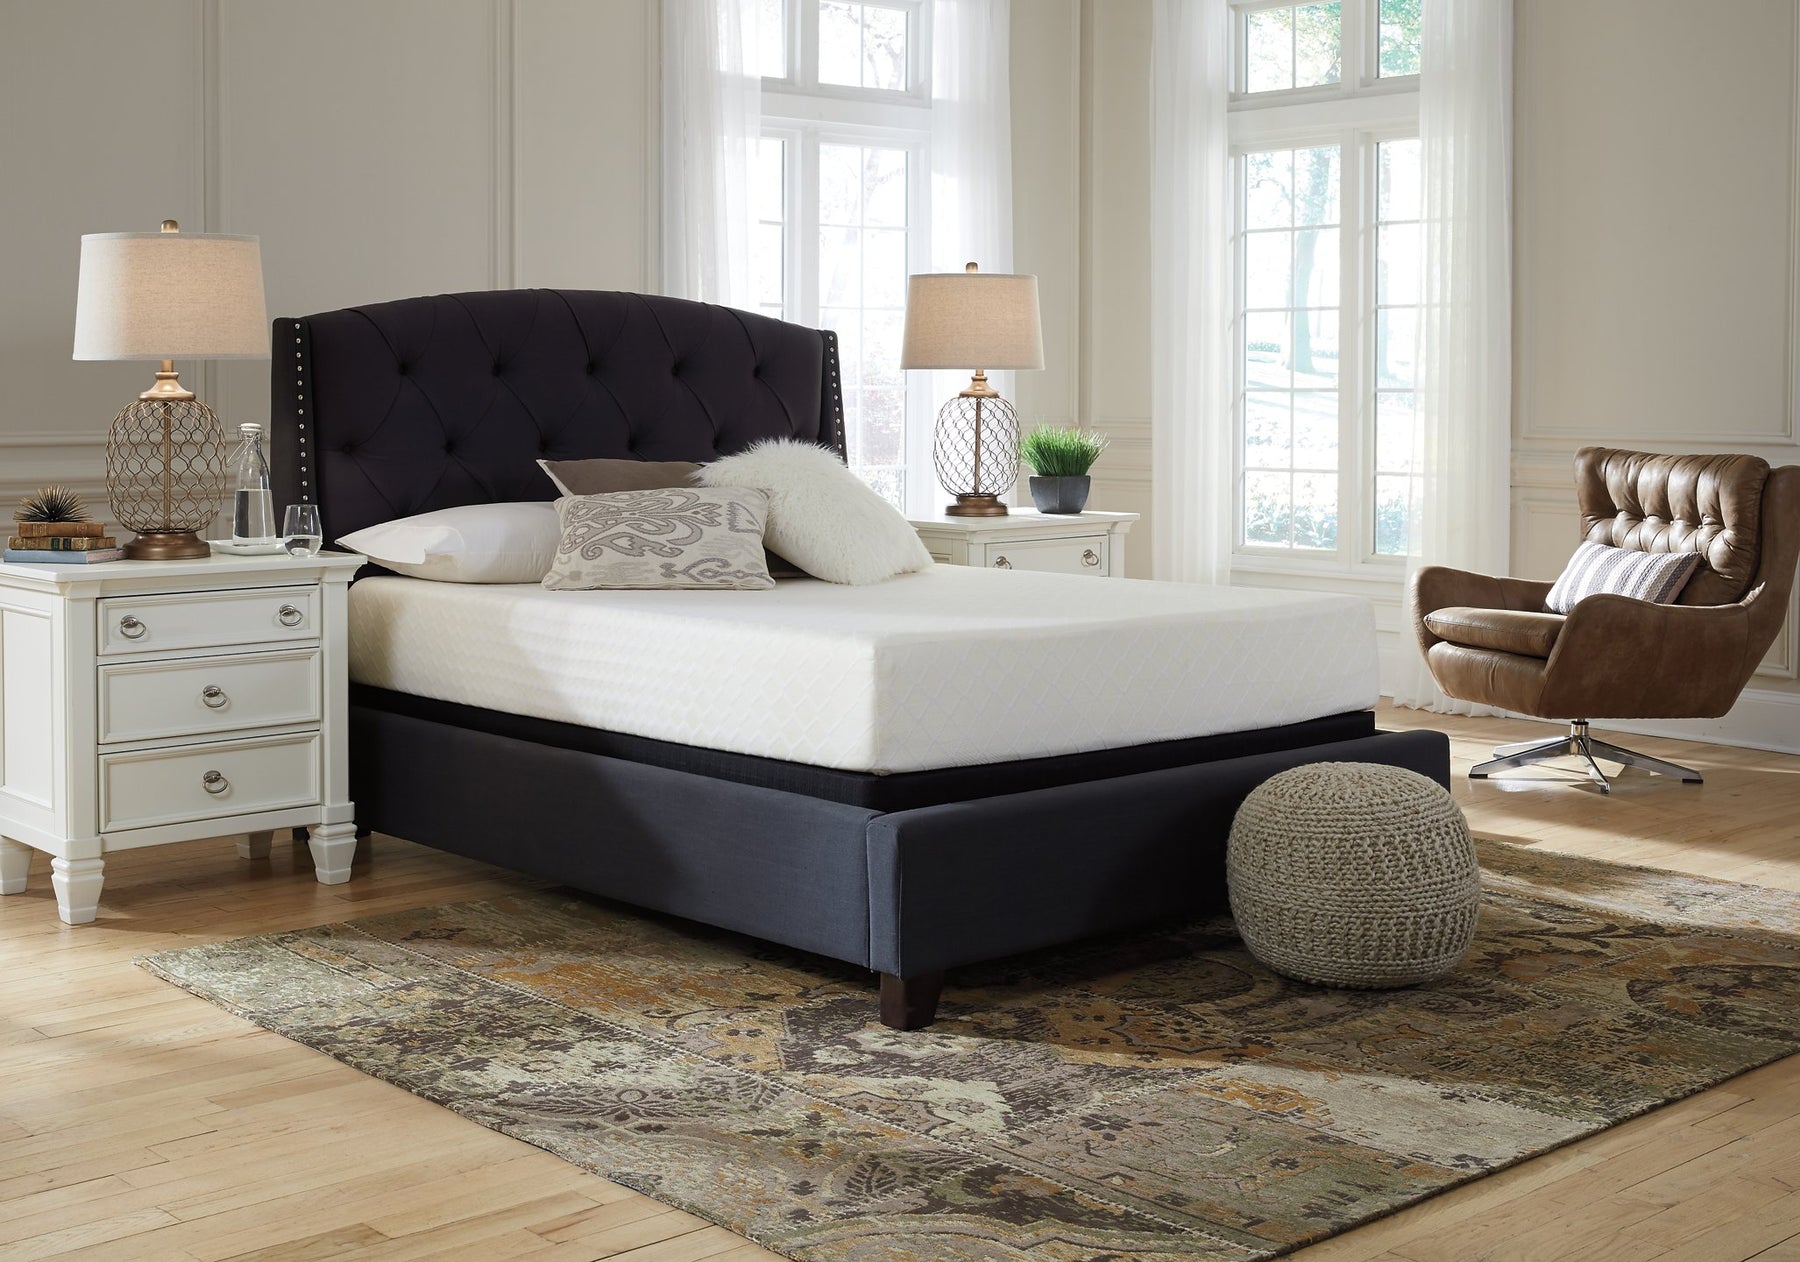 Match Your Sleep Style to Your Dream Mattress